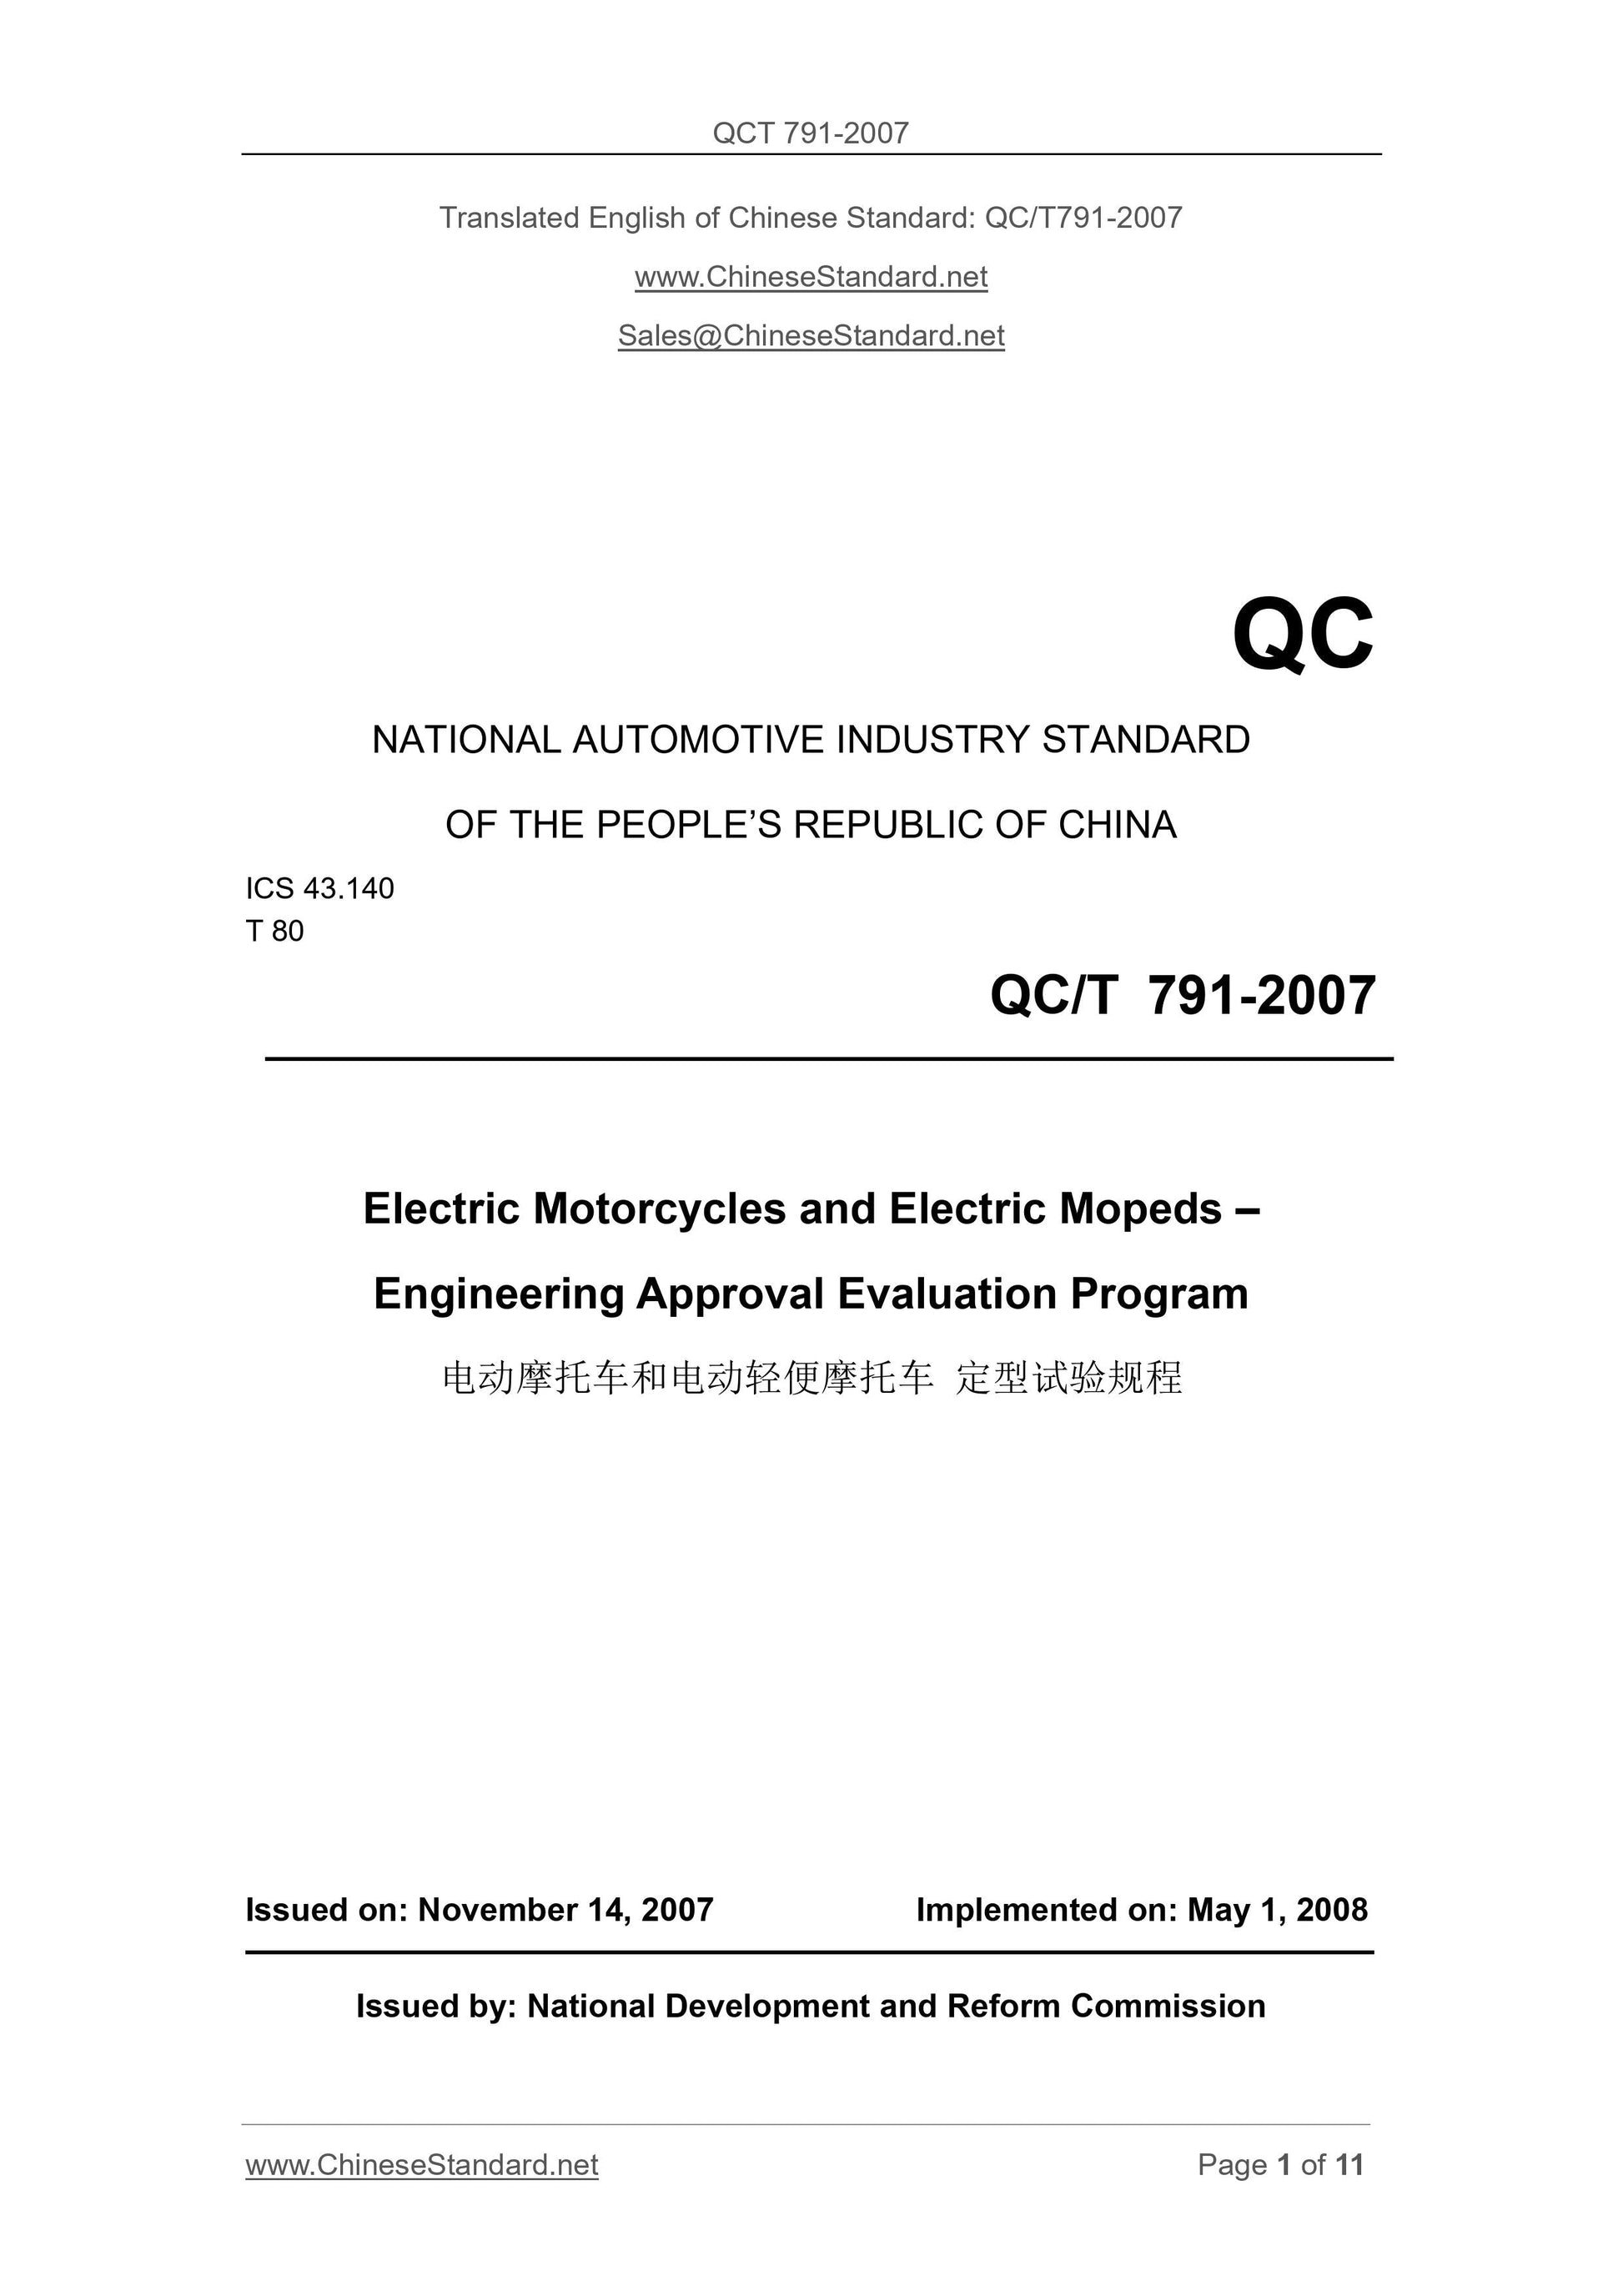 QC/T 791-2007 Page 1